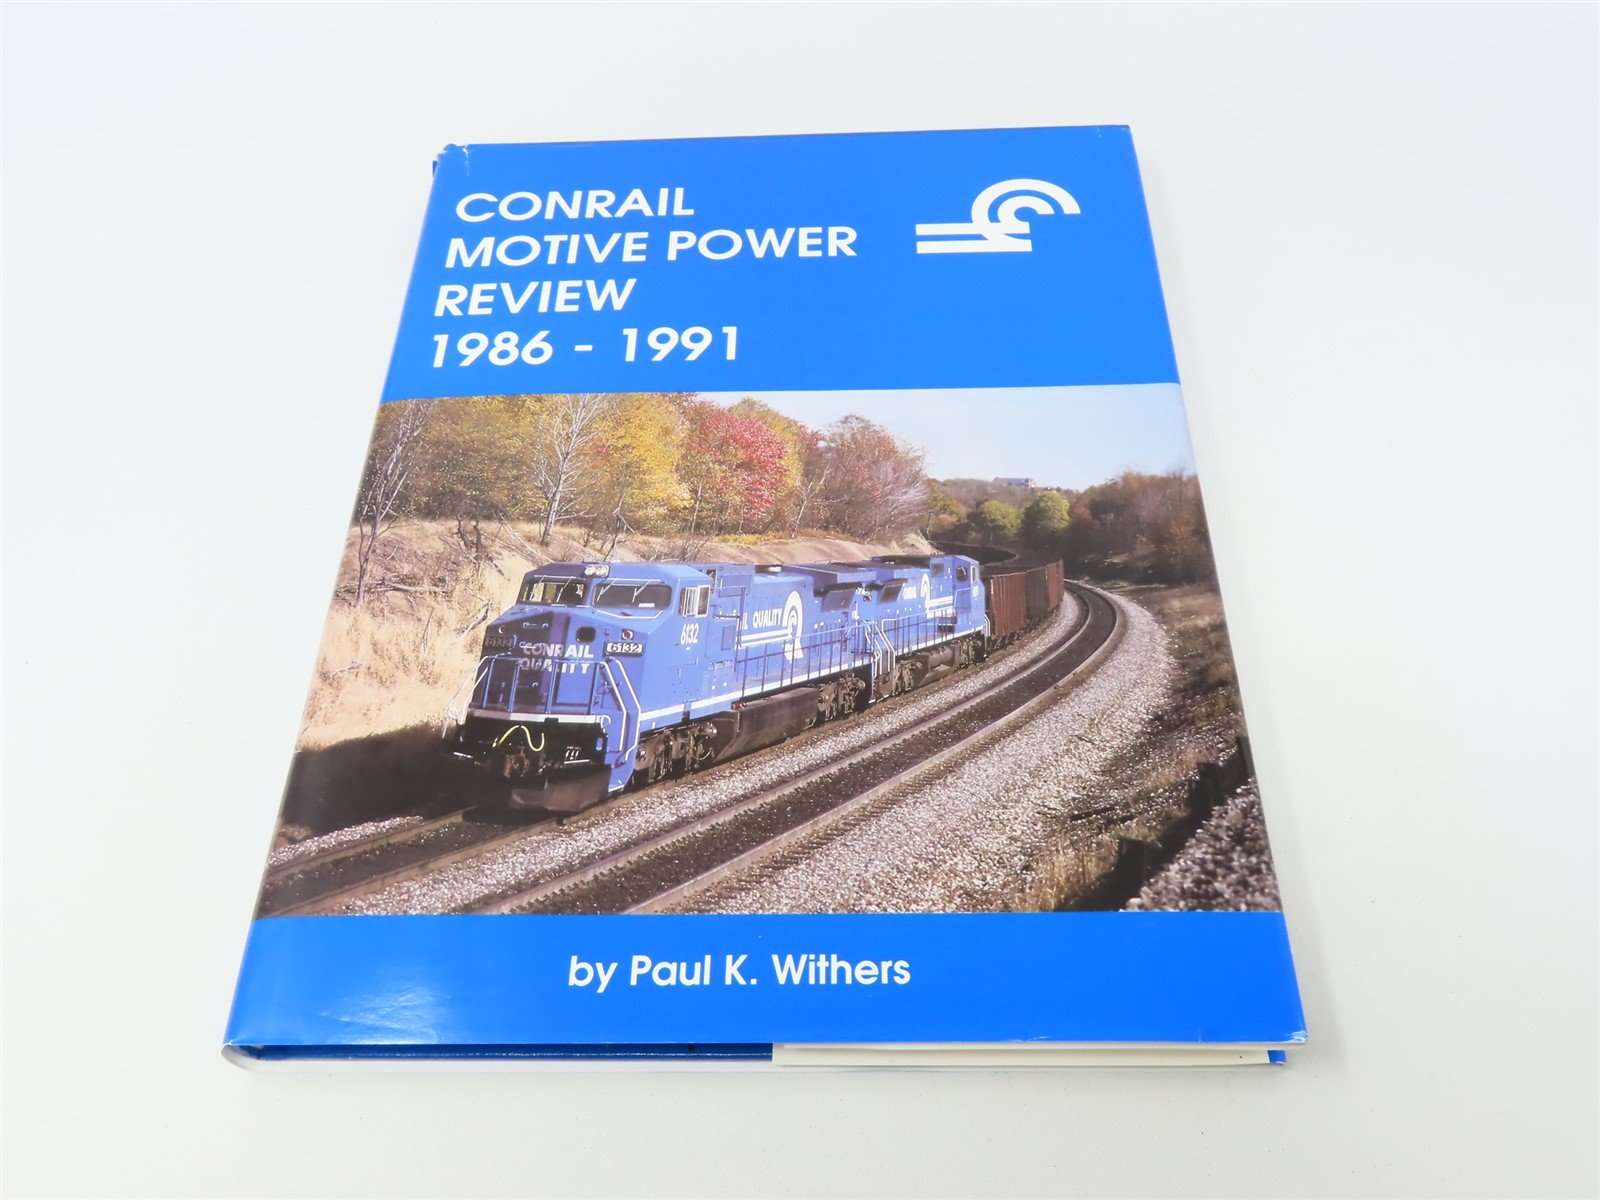 Conrail Motive Power Review 1986-1991 by Paul K. Withers ©1992 HC Book